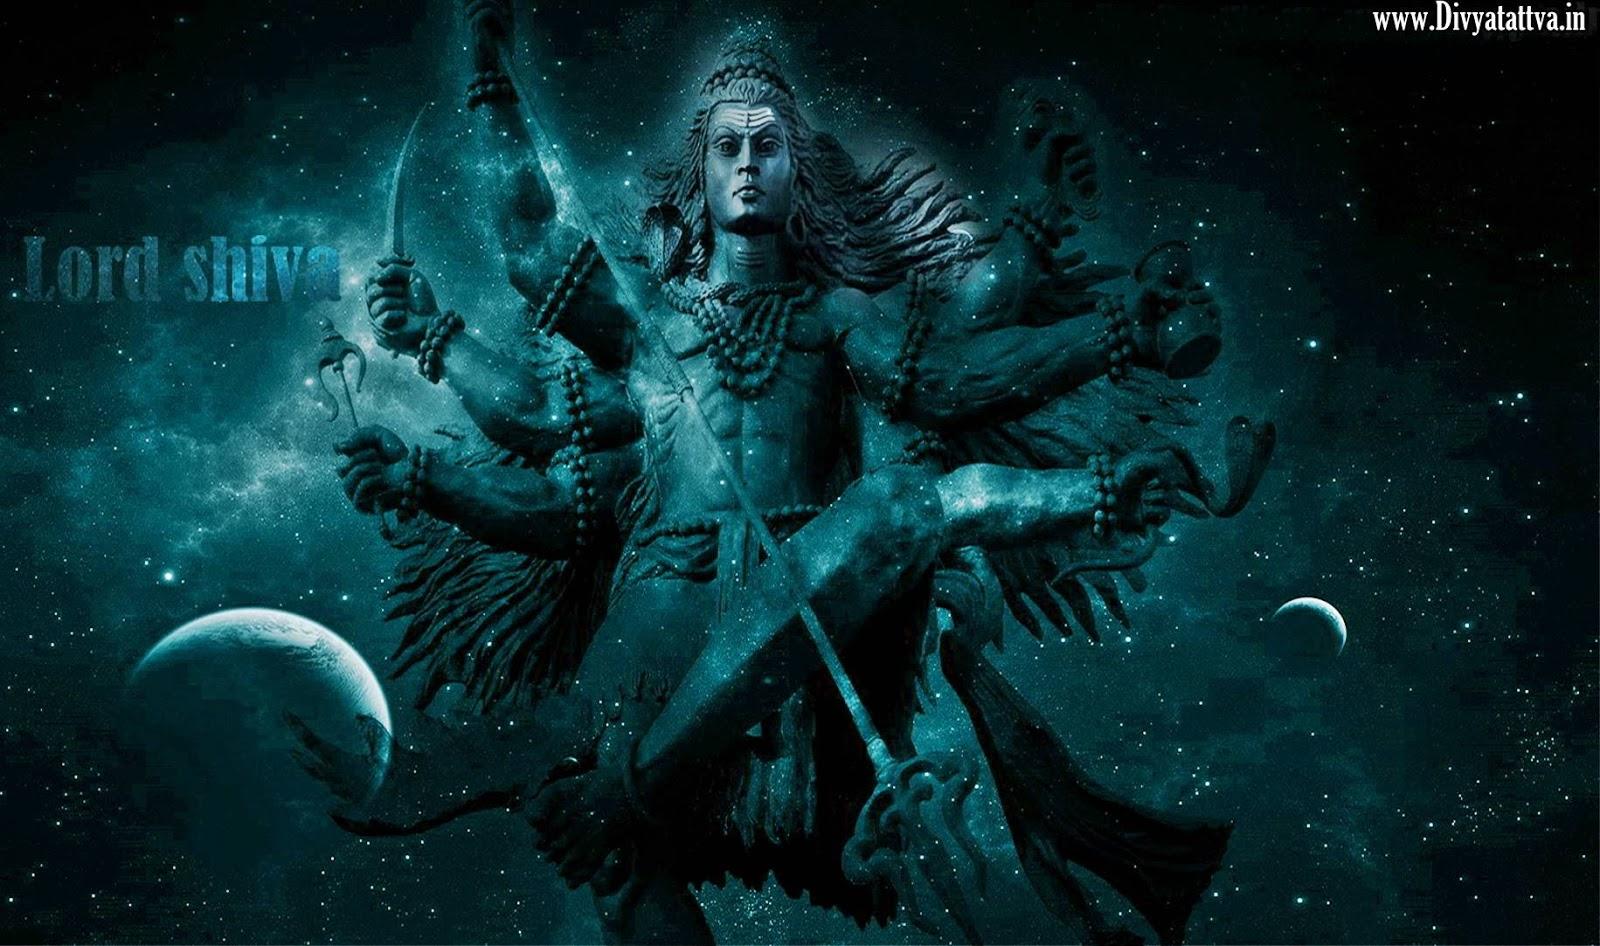 Angry Lord Shiva Wallpapers Wallpaper Cave